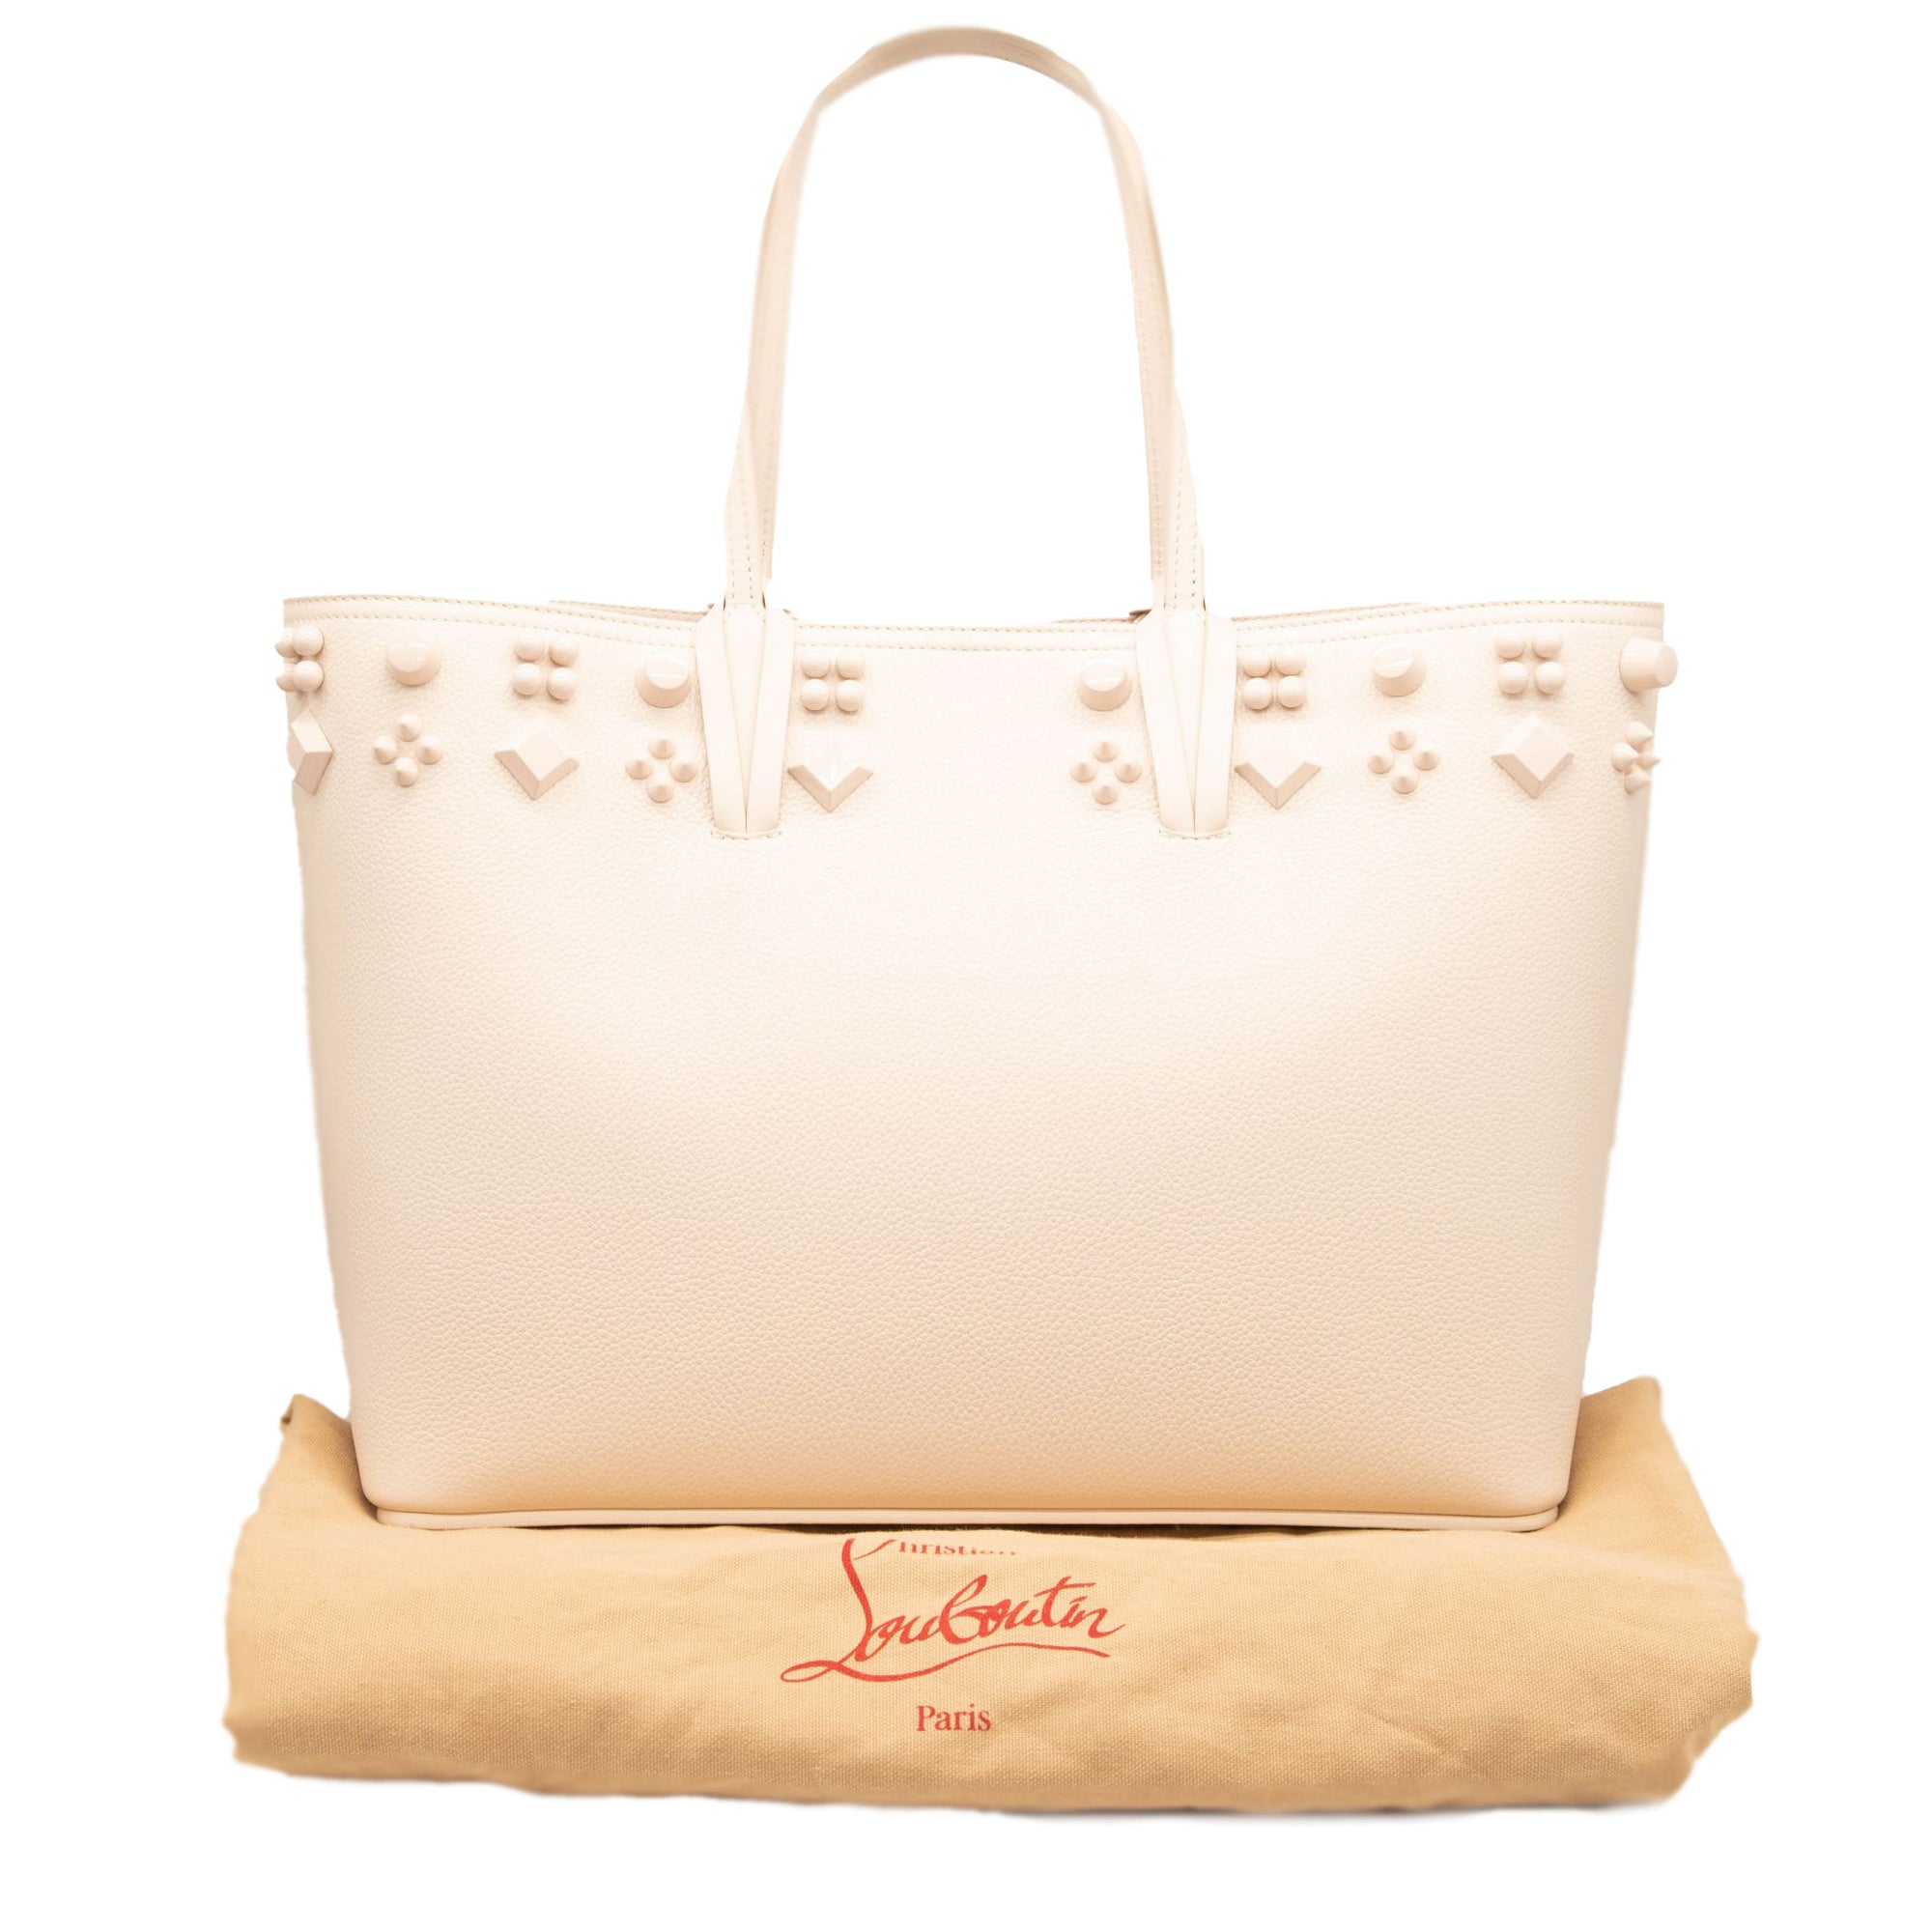 CHRISTIAN LOUBOUTIN Studded Leather and Rubber Tote for Men